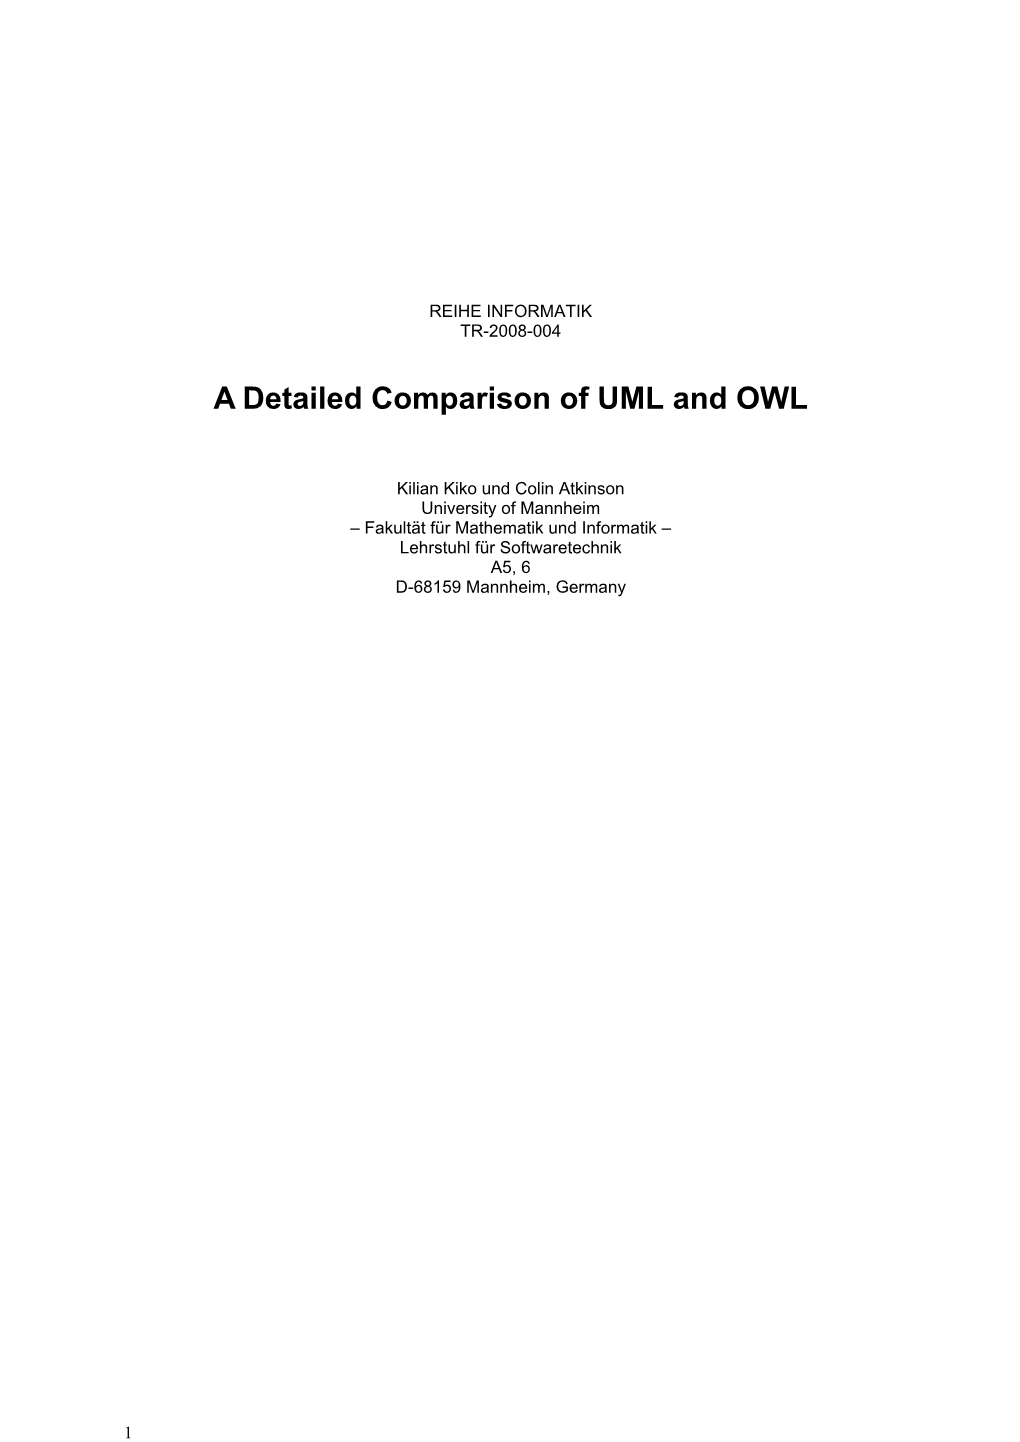 A Detailed Comparison of UML and OWL